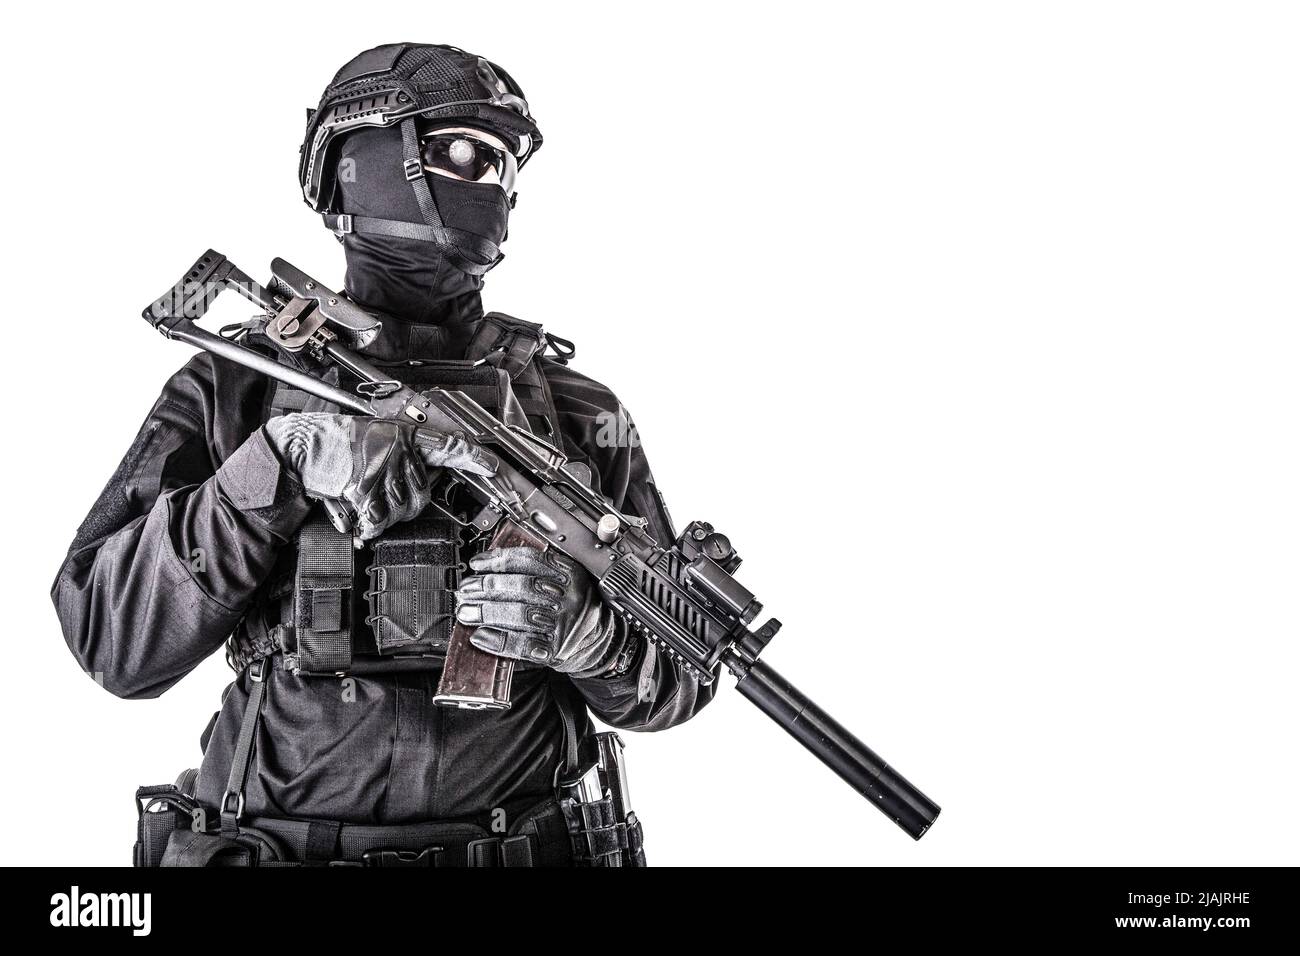 Studio portrait of police special reaction team member black uniform and helmet, armed with assault rifle. Stock Photo